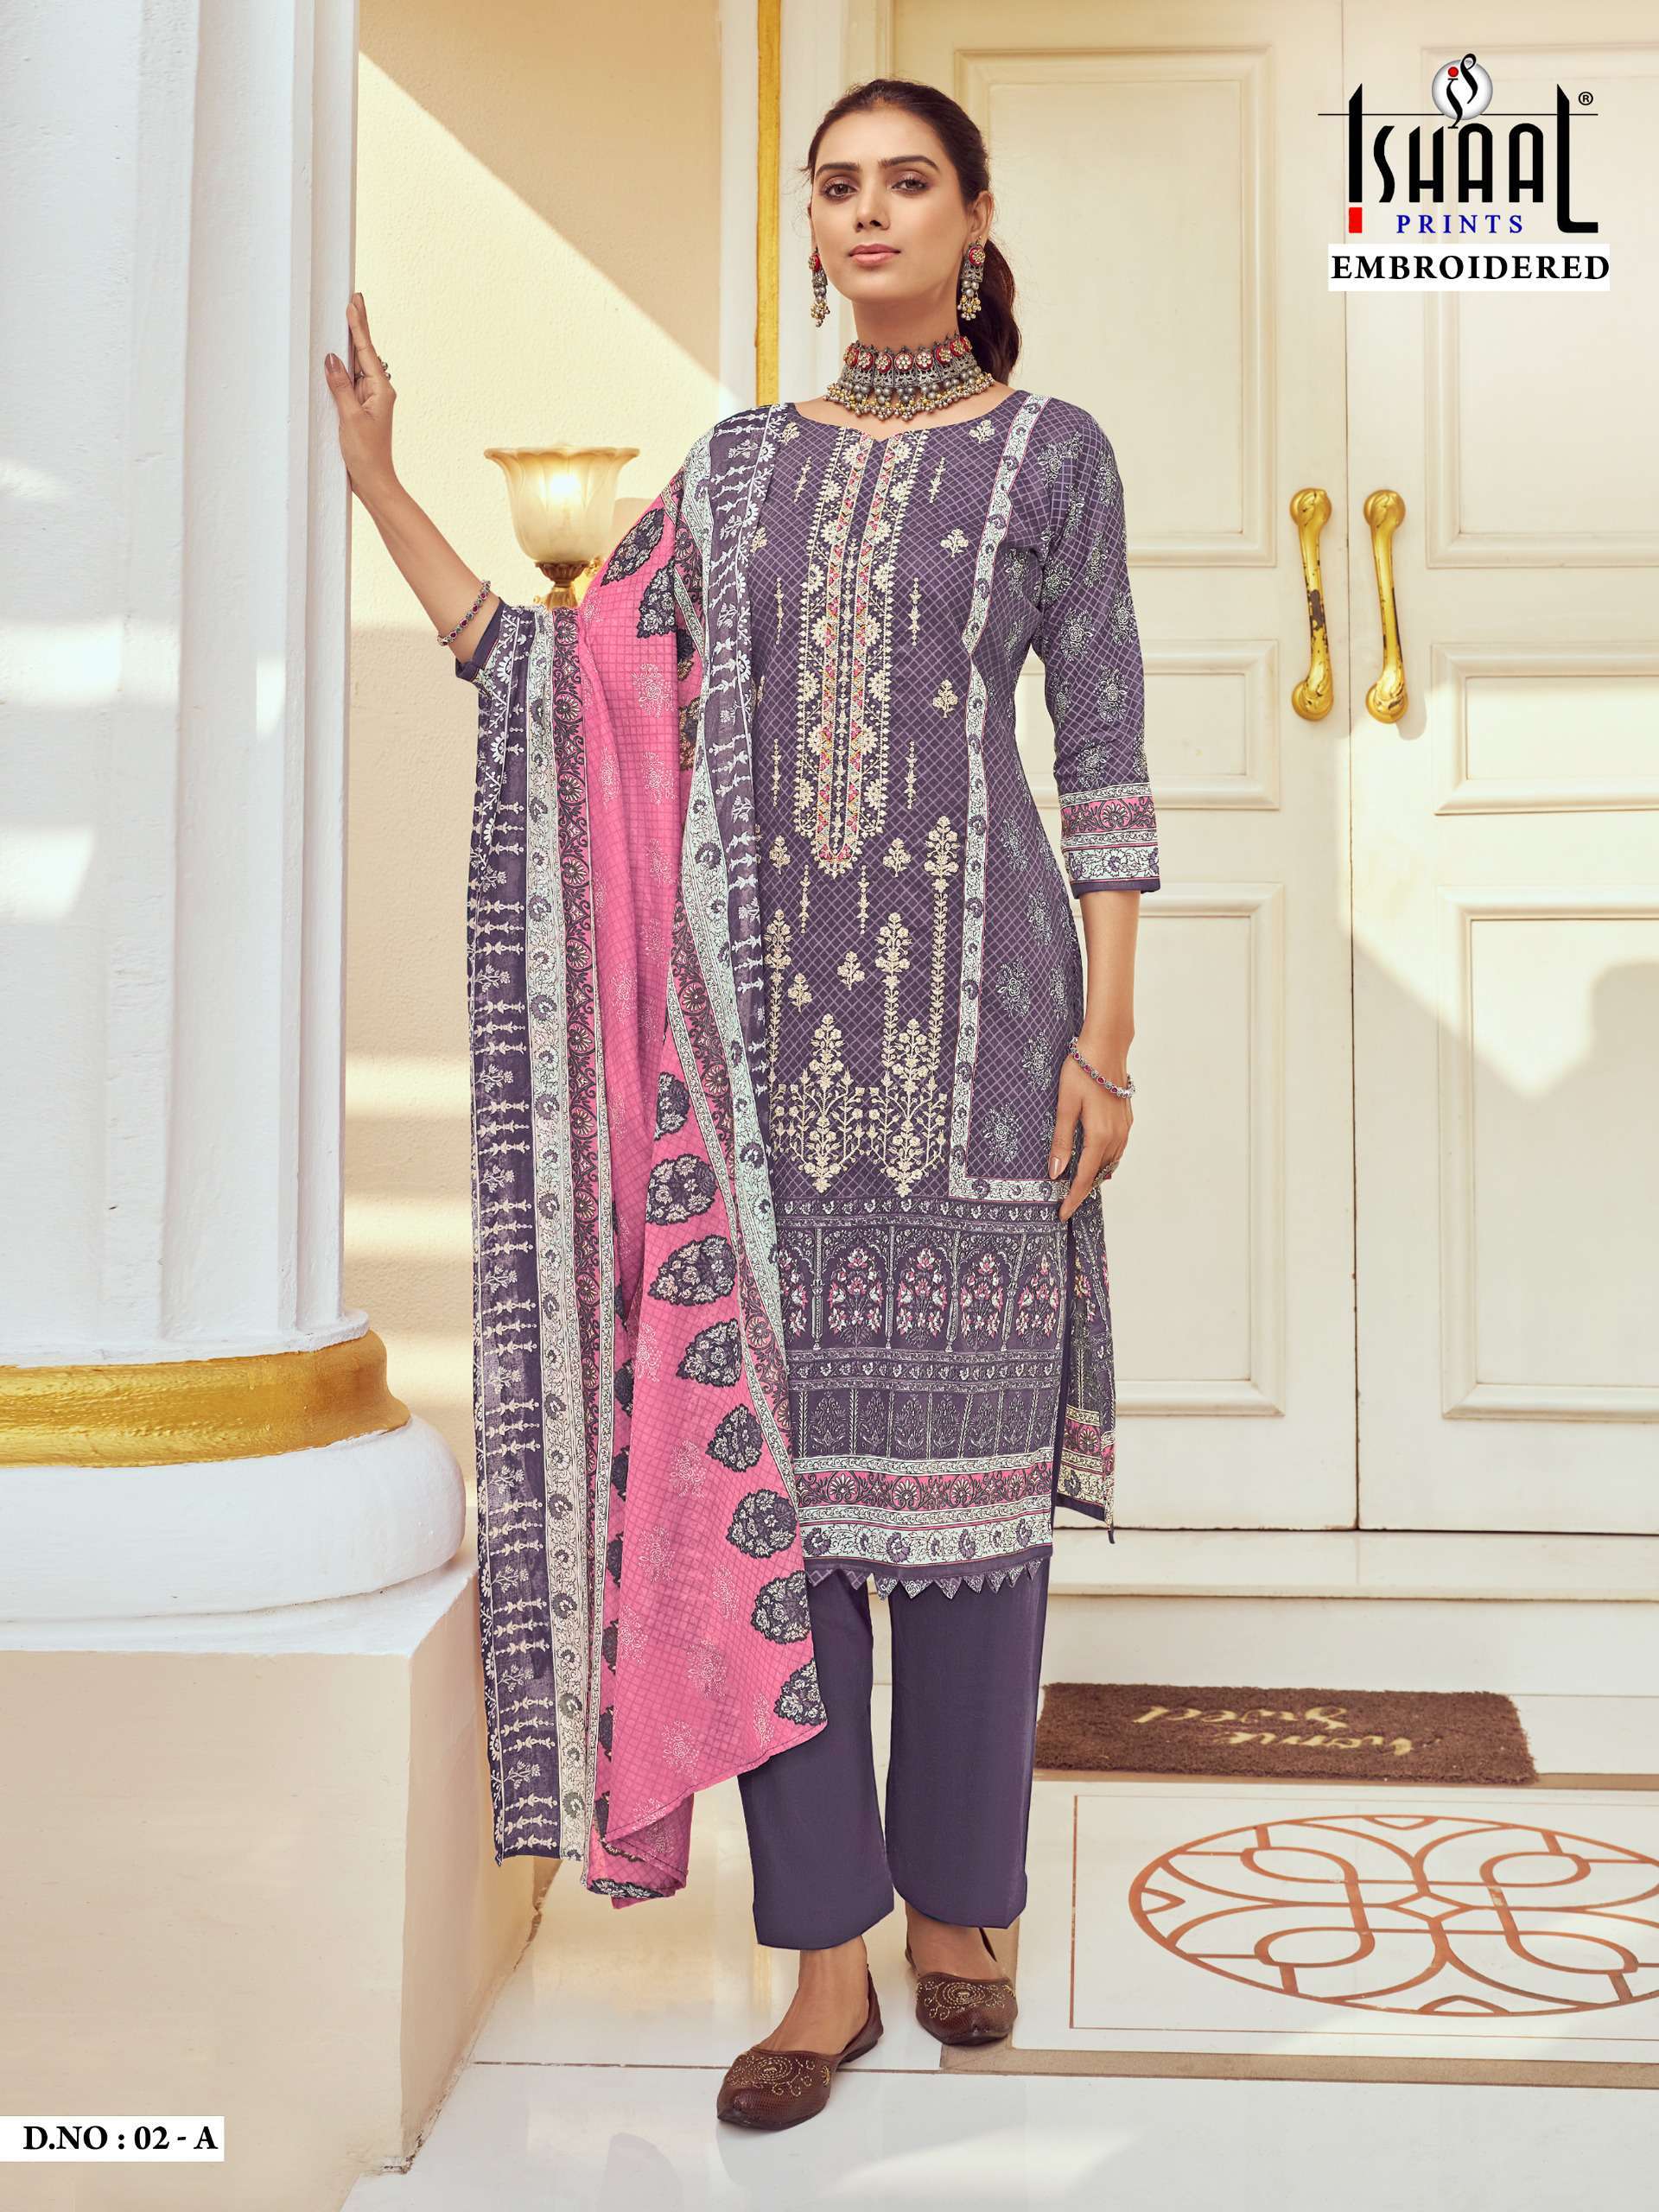 Ishaal Embroidered D 2 Colors Lawn Cotton Dress Material Online Suppliers